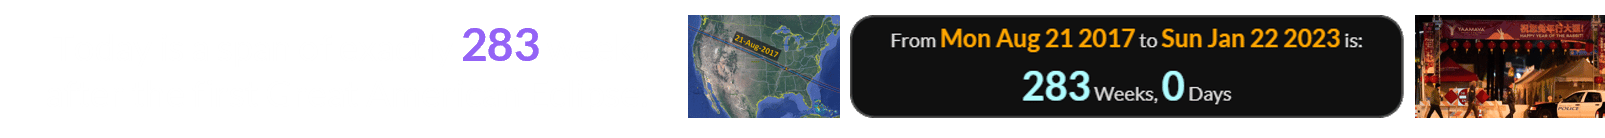 Today is a span of exactly 283 weeks after the first Great American Eclipse: